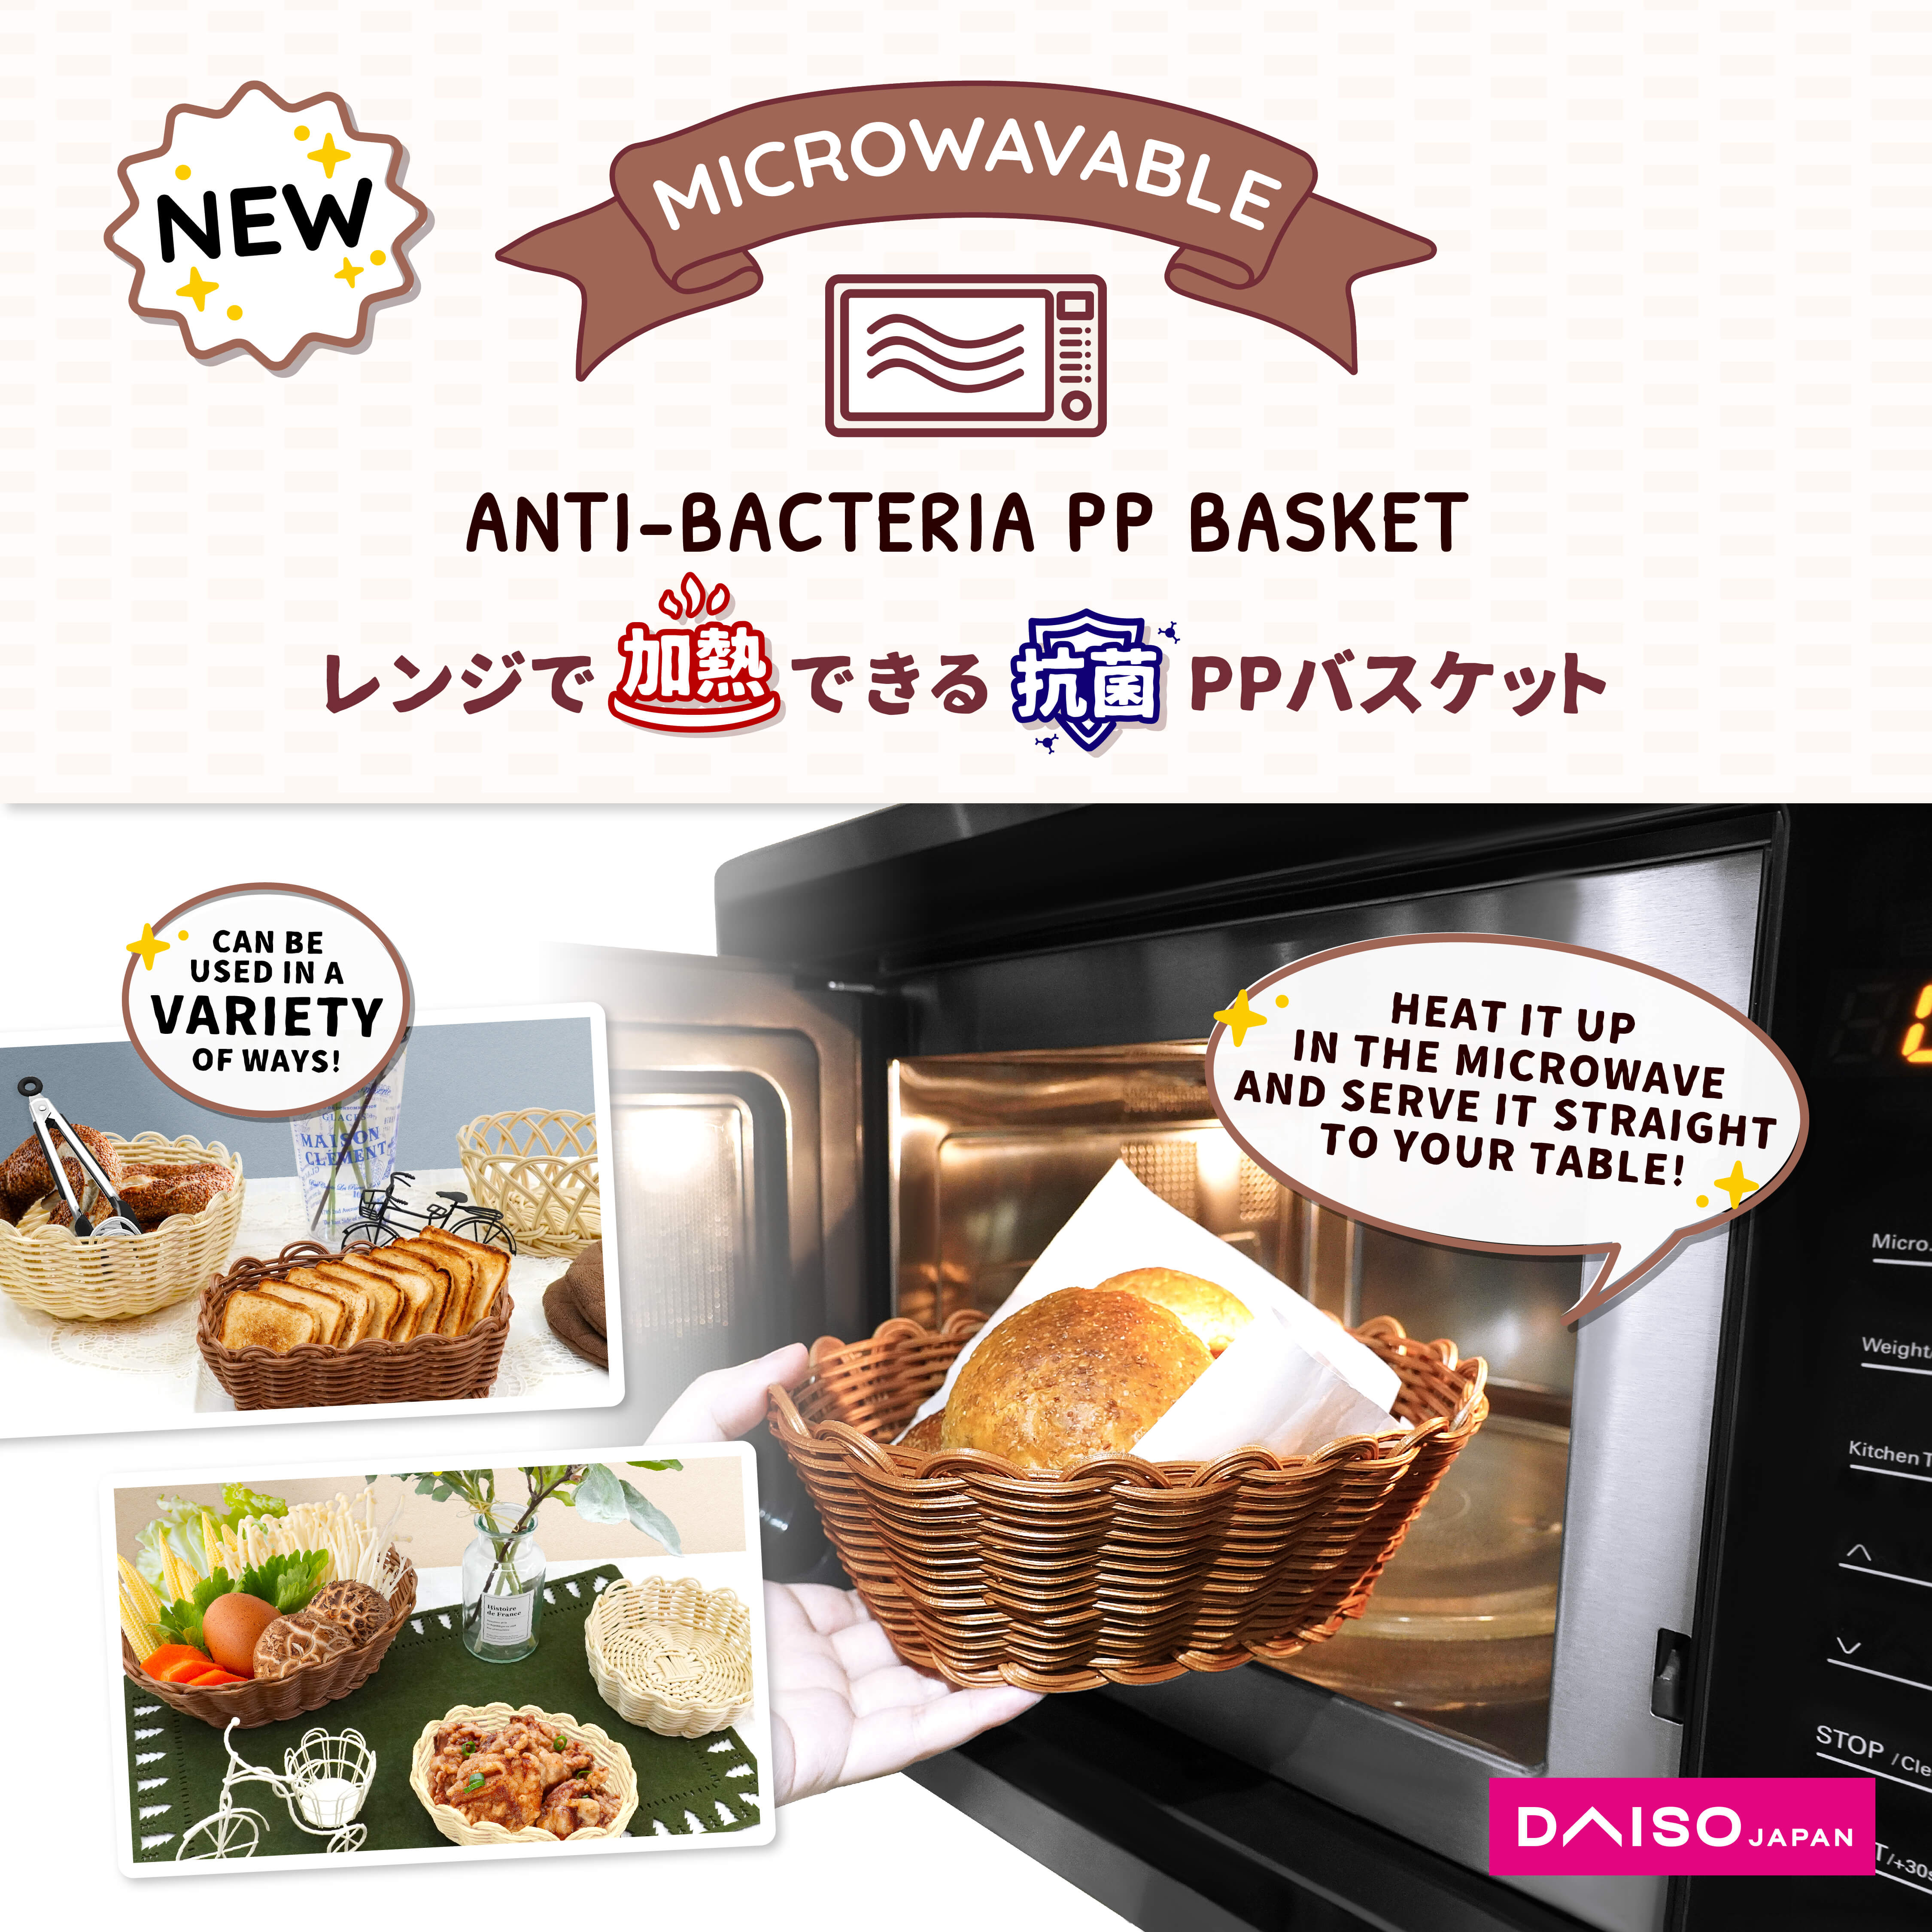 NEW IN! MICROWAVABLE PP SAFE BASKETS